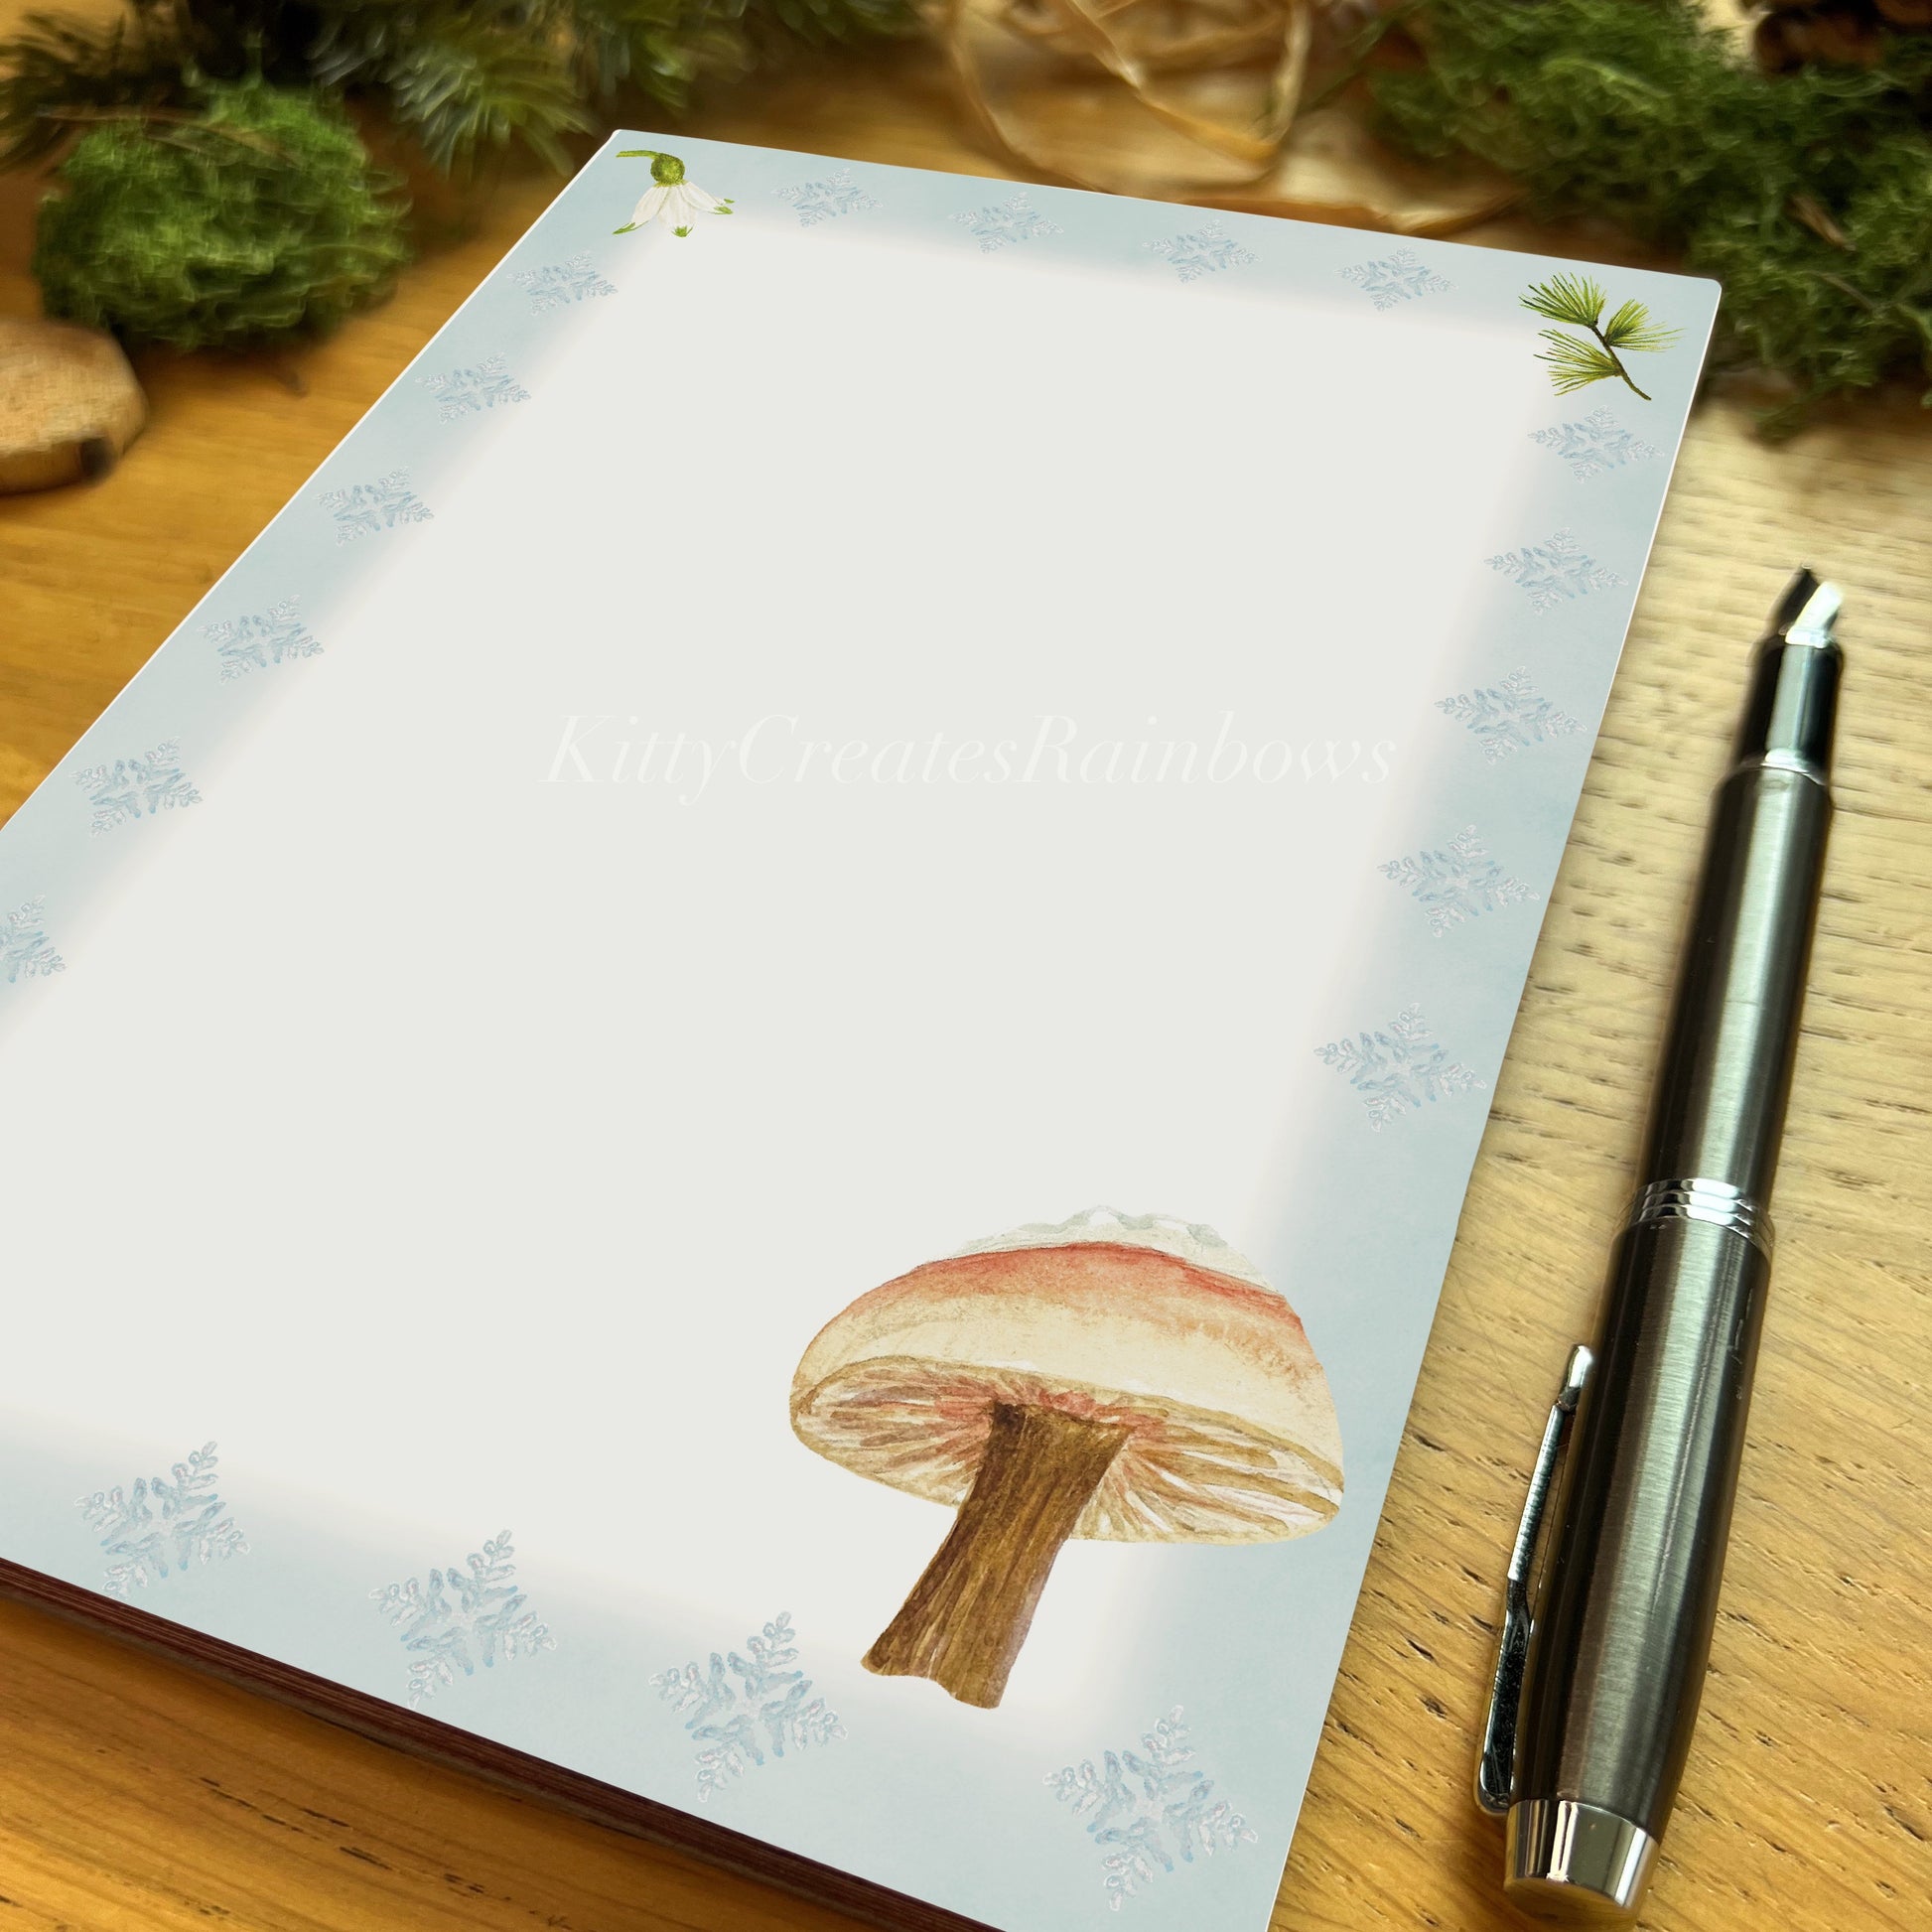 Snow topped milkcap mushroom illustrated notepad page with icy blue border on a wooden desk with a fountain pen